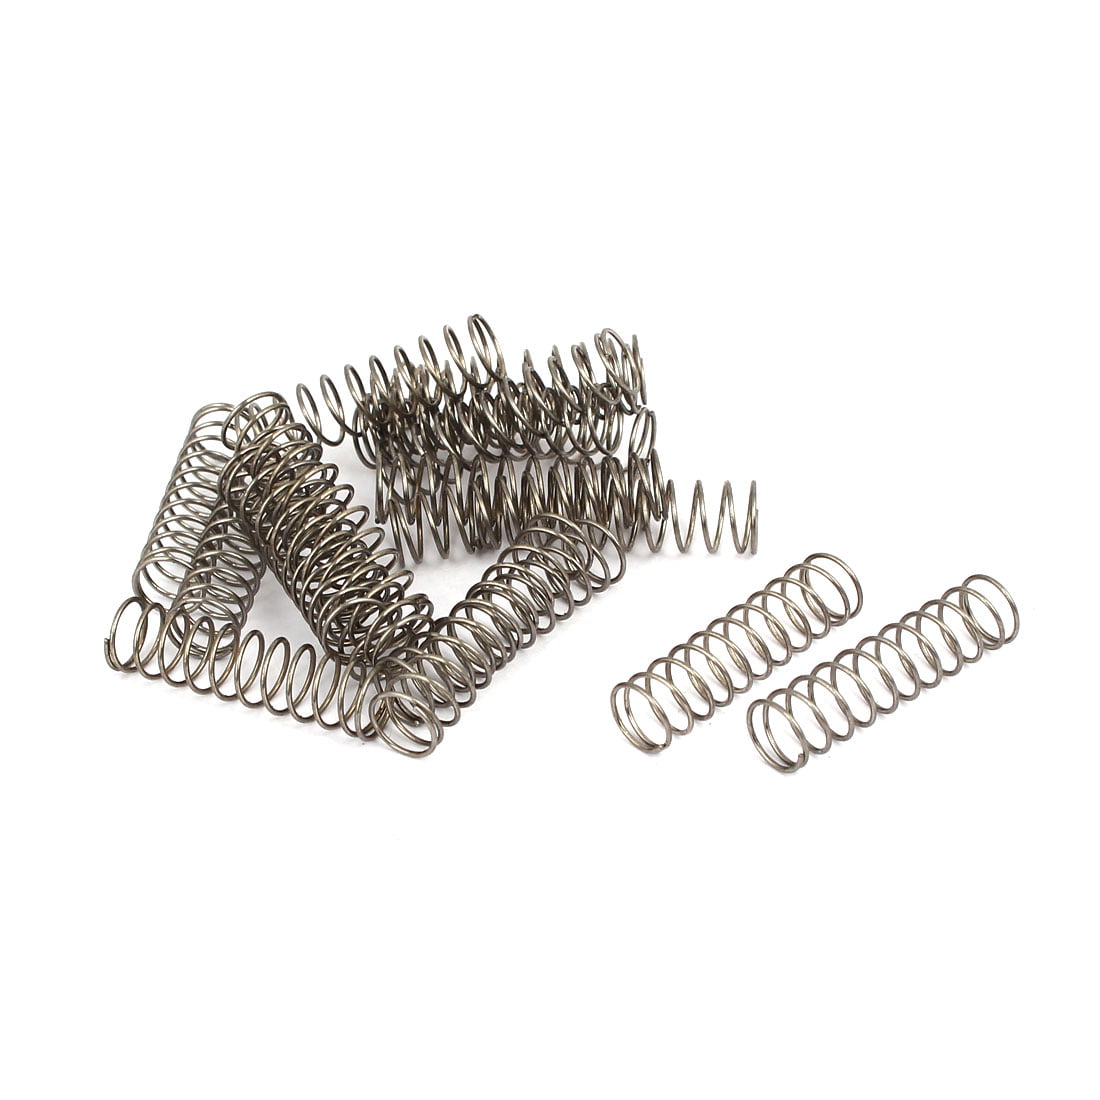 0.3mmx4mmx305mm 304 Stainless Steel Compression Springs Silver Tone 